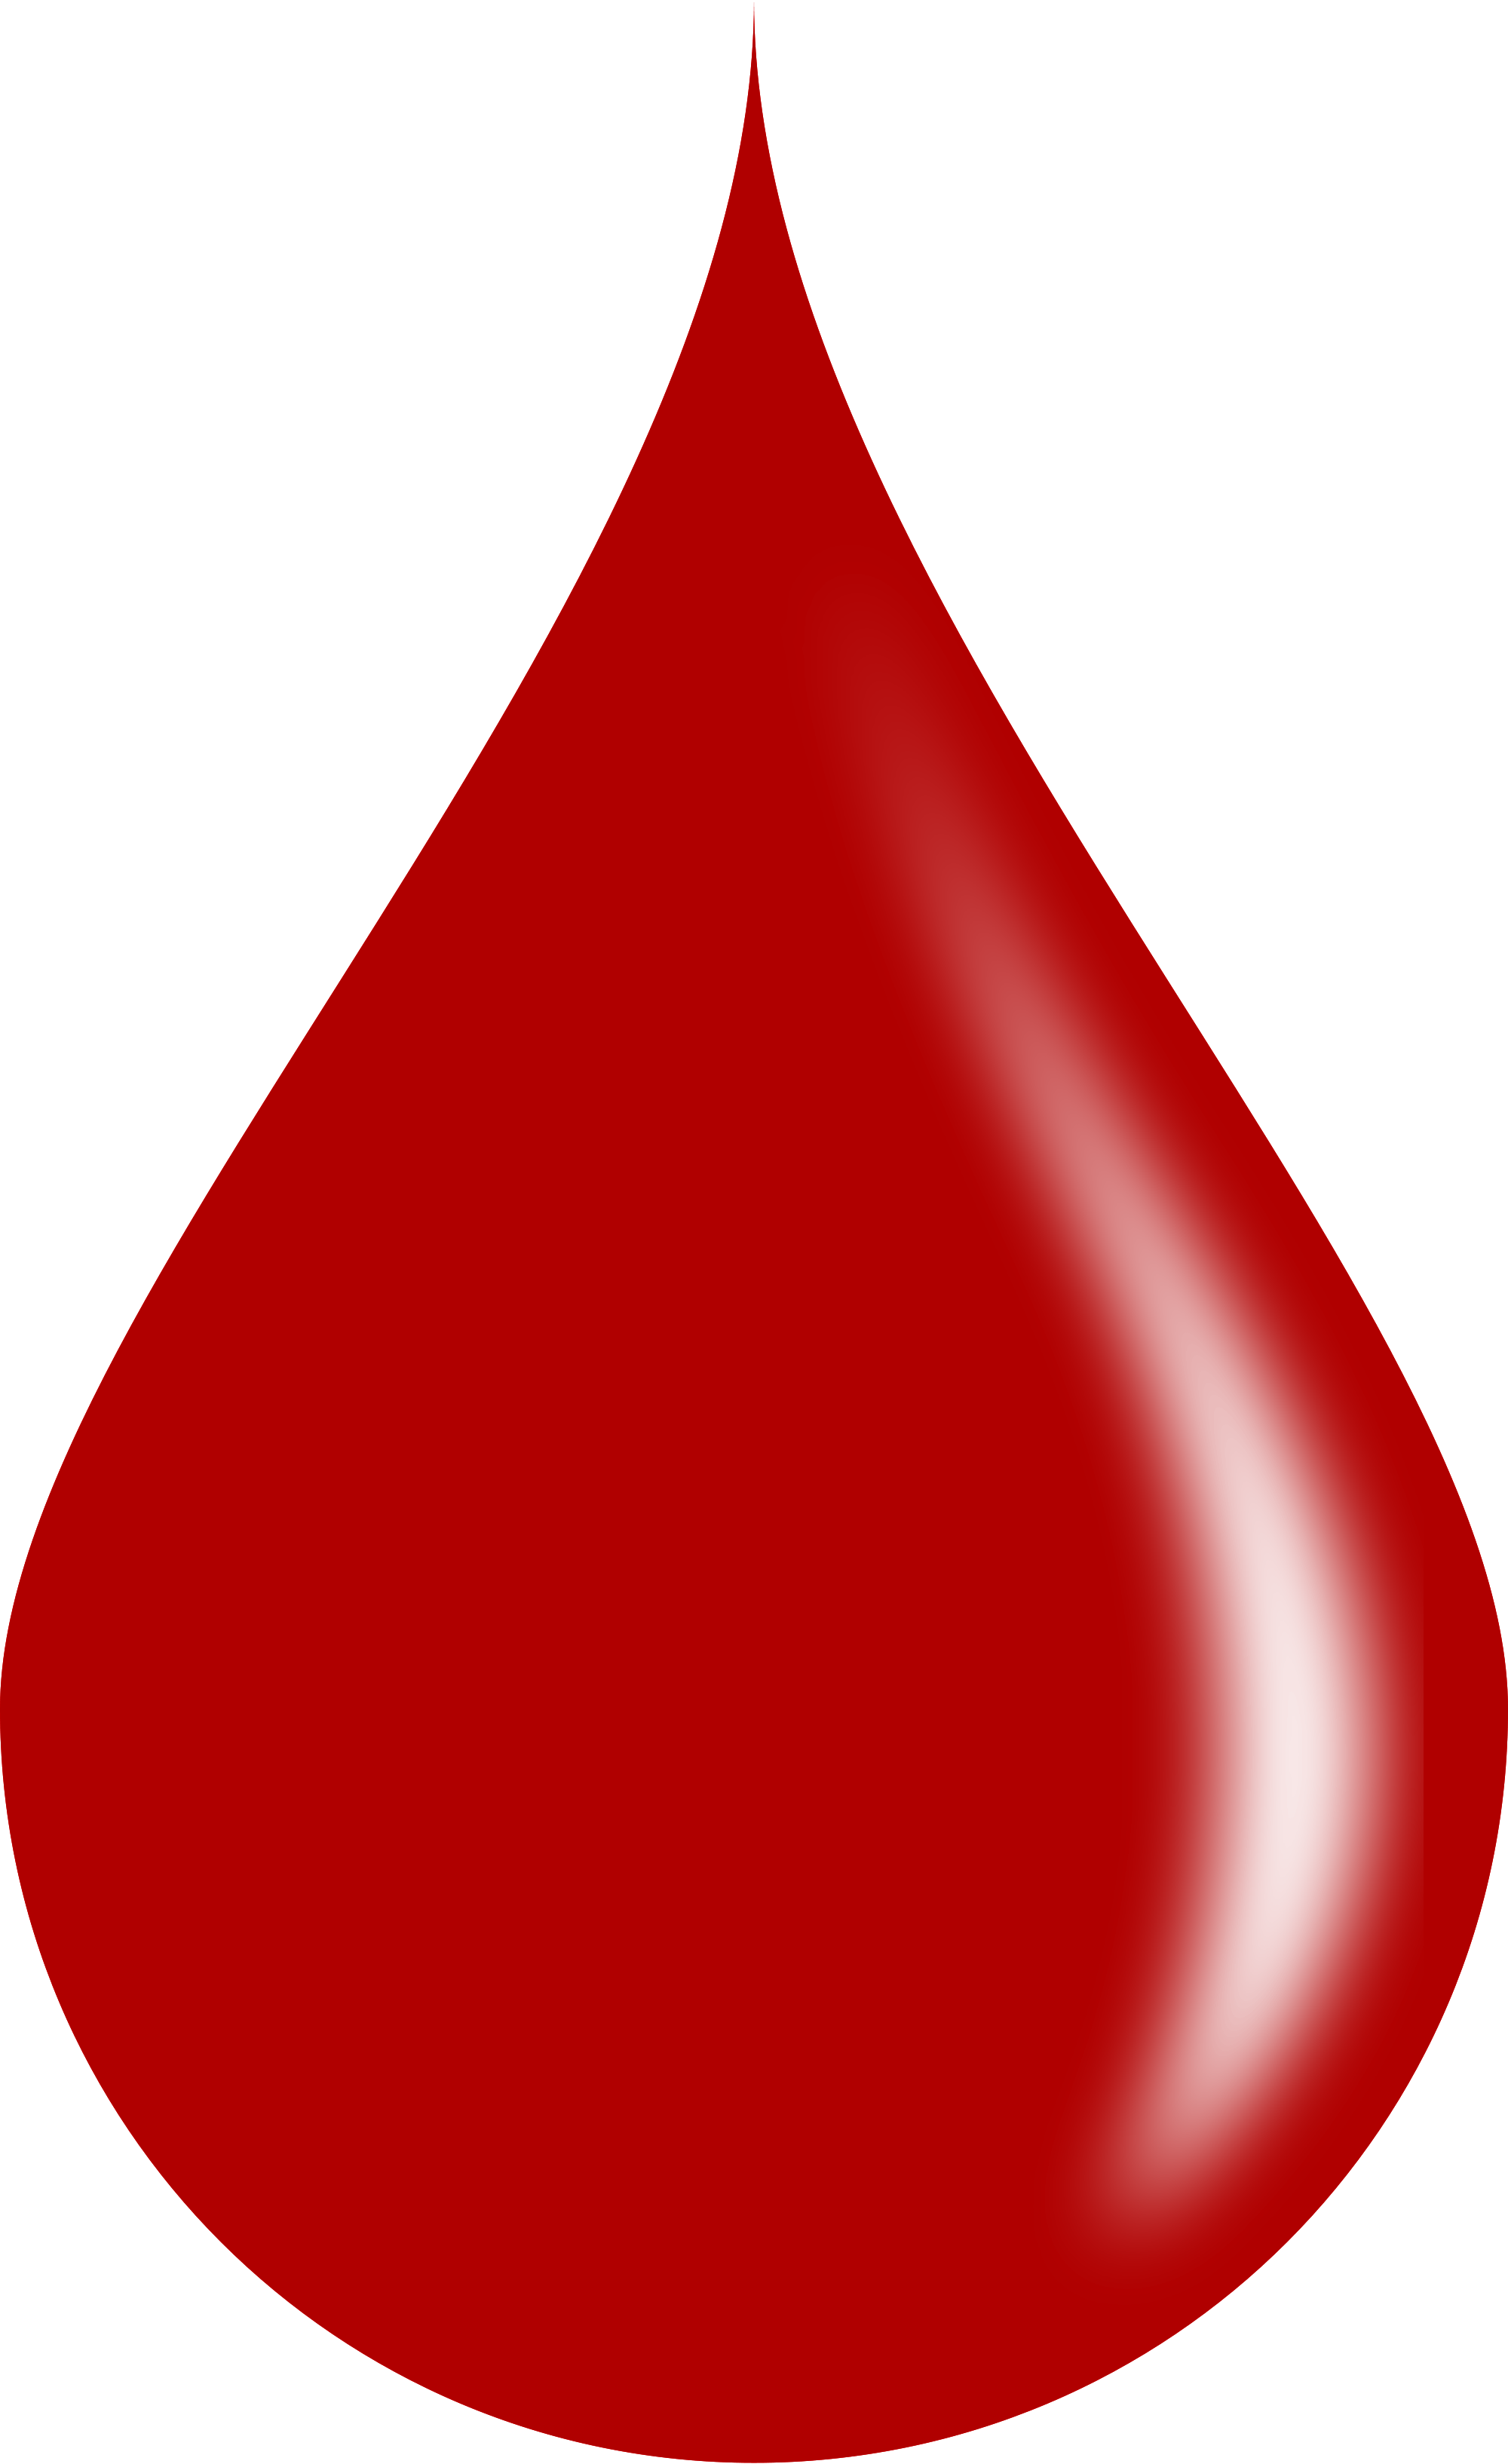 Blood Logo - blood logo png. Clipart & Vectors for free 2019